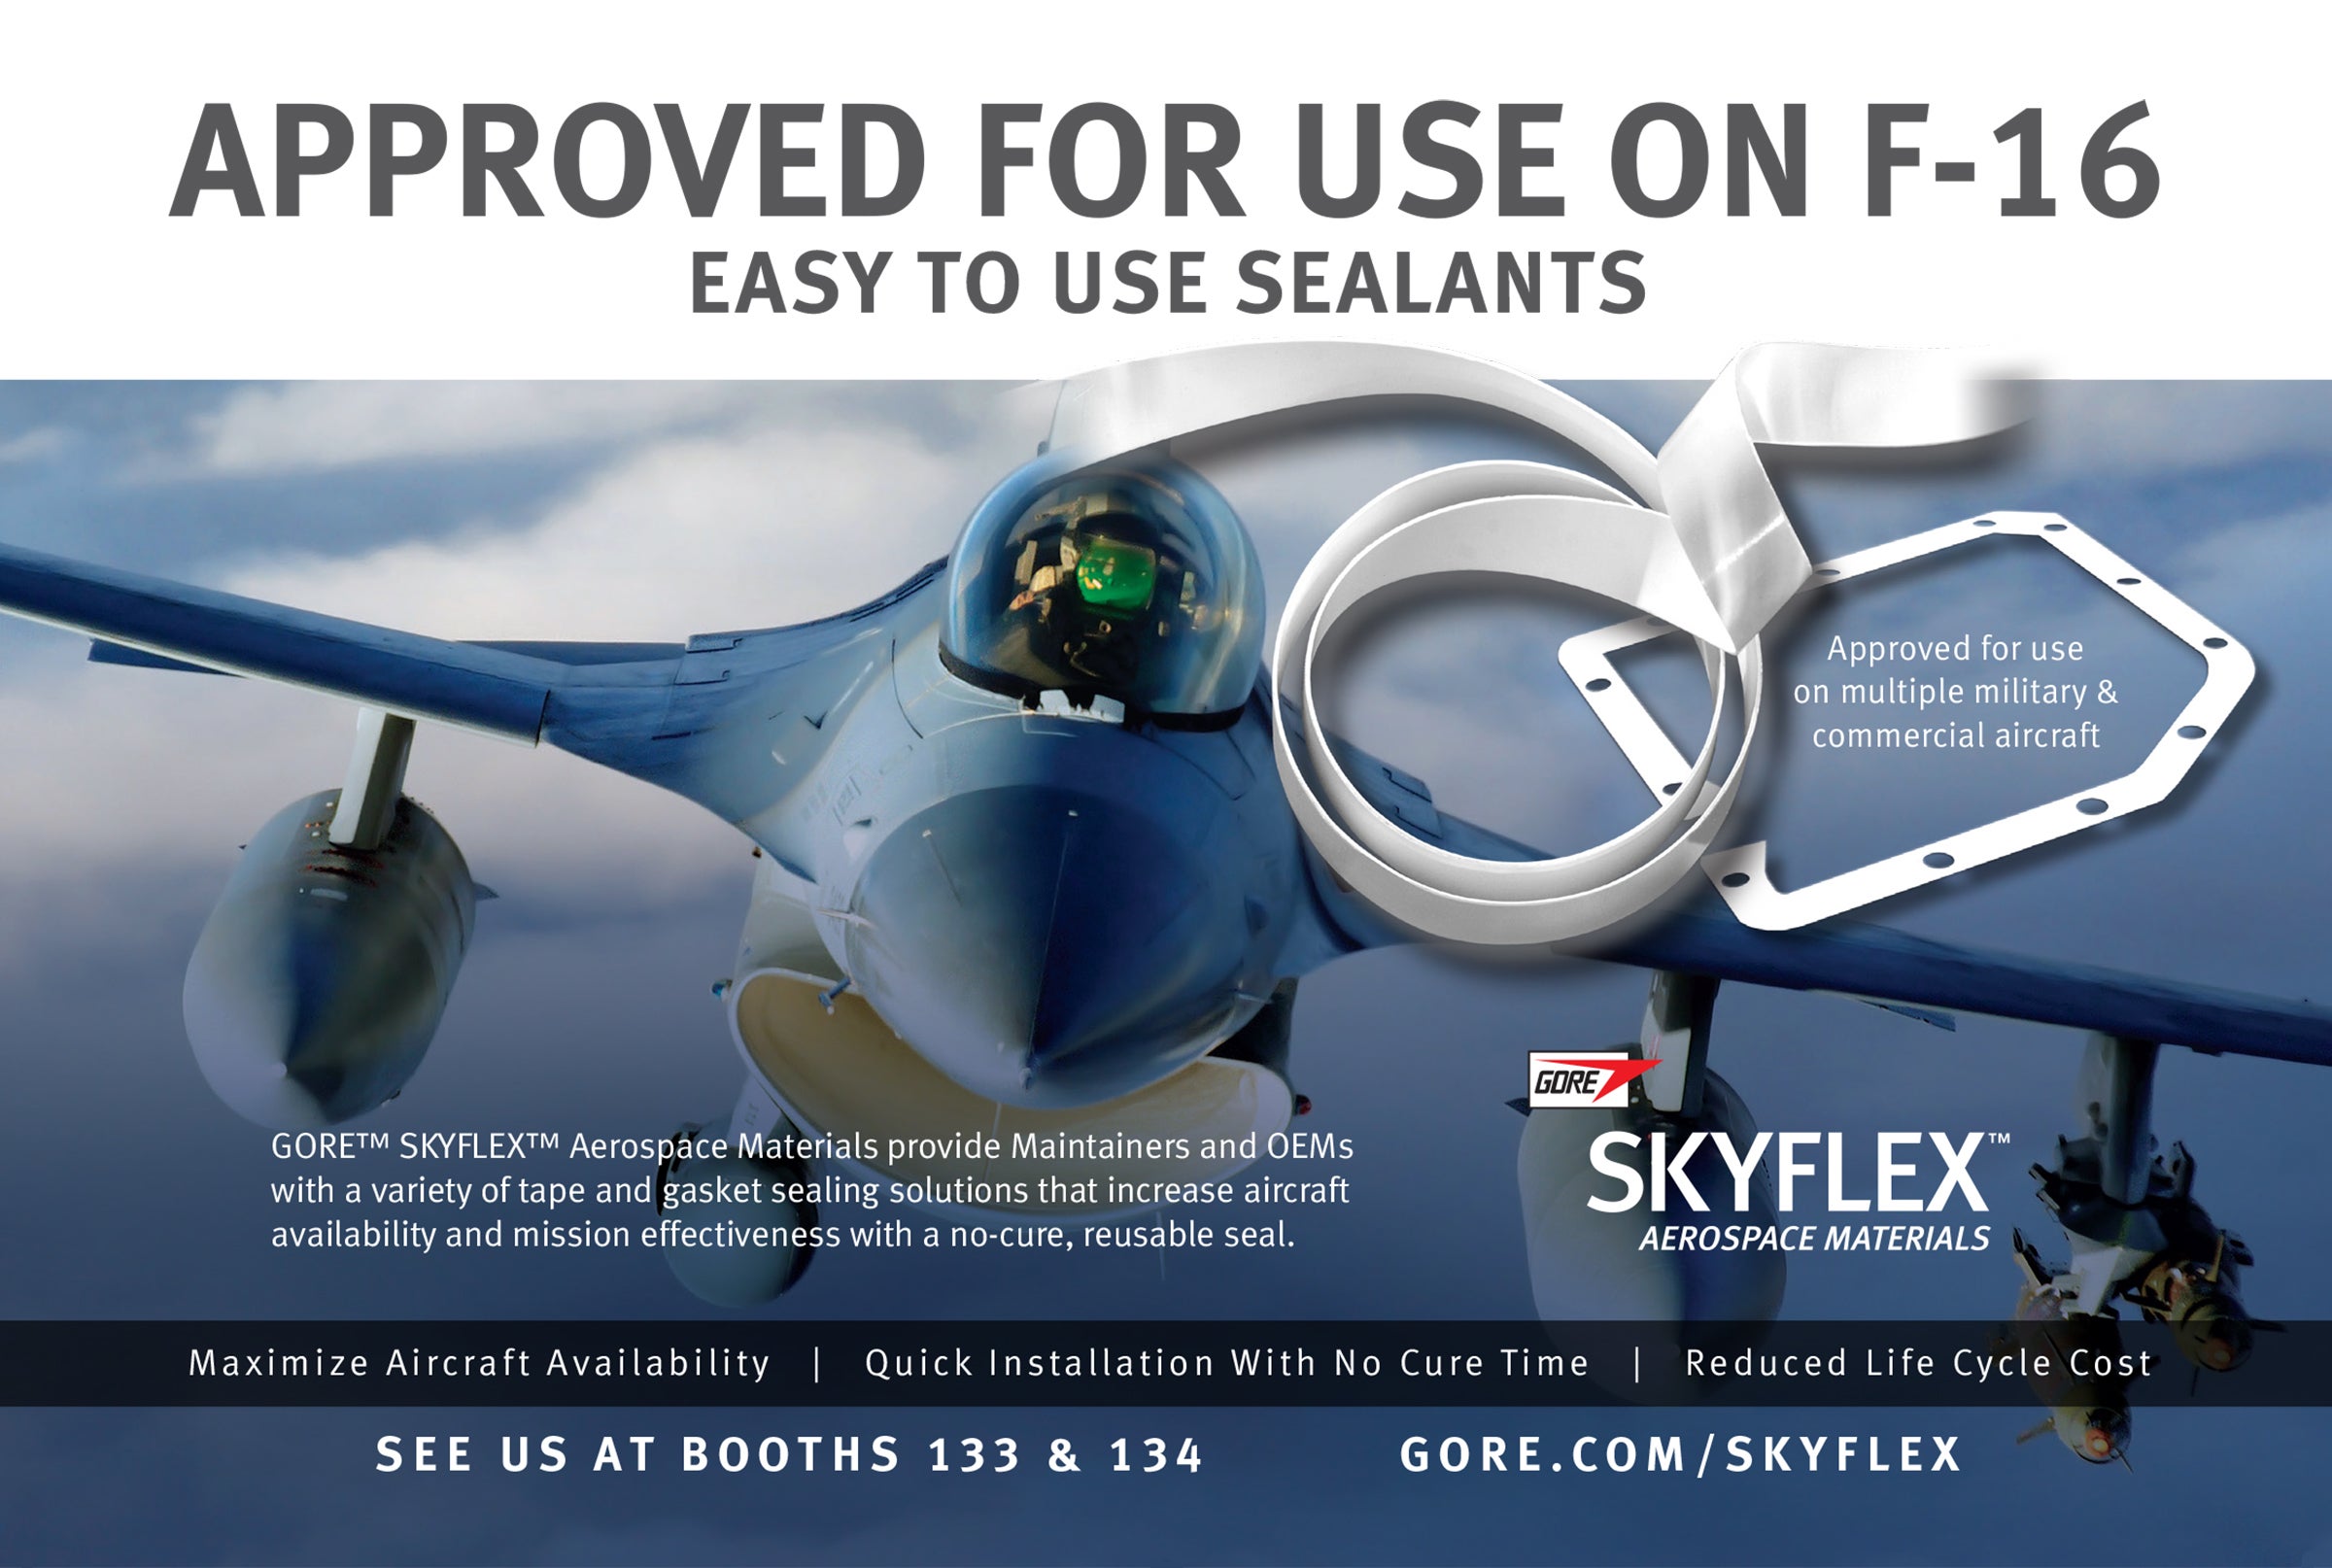 Approved for use on F-16 - Easy to use sealants